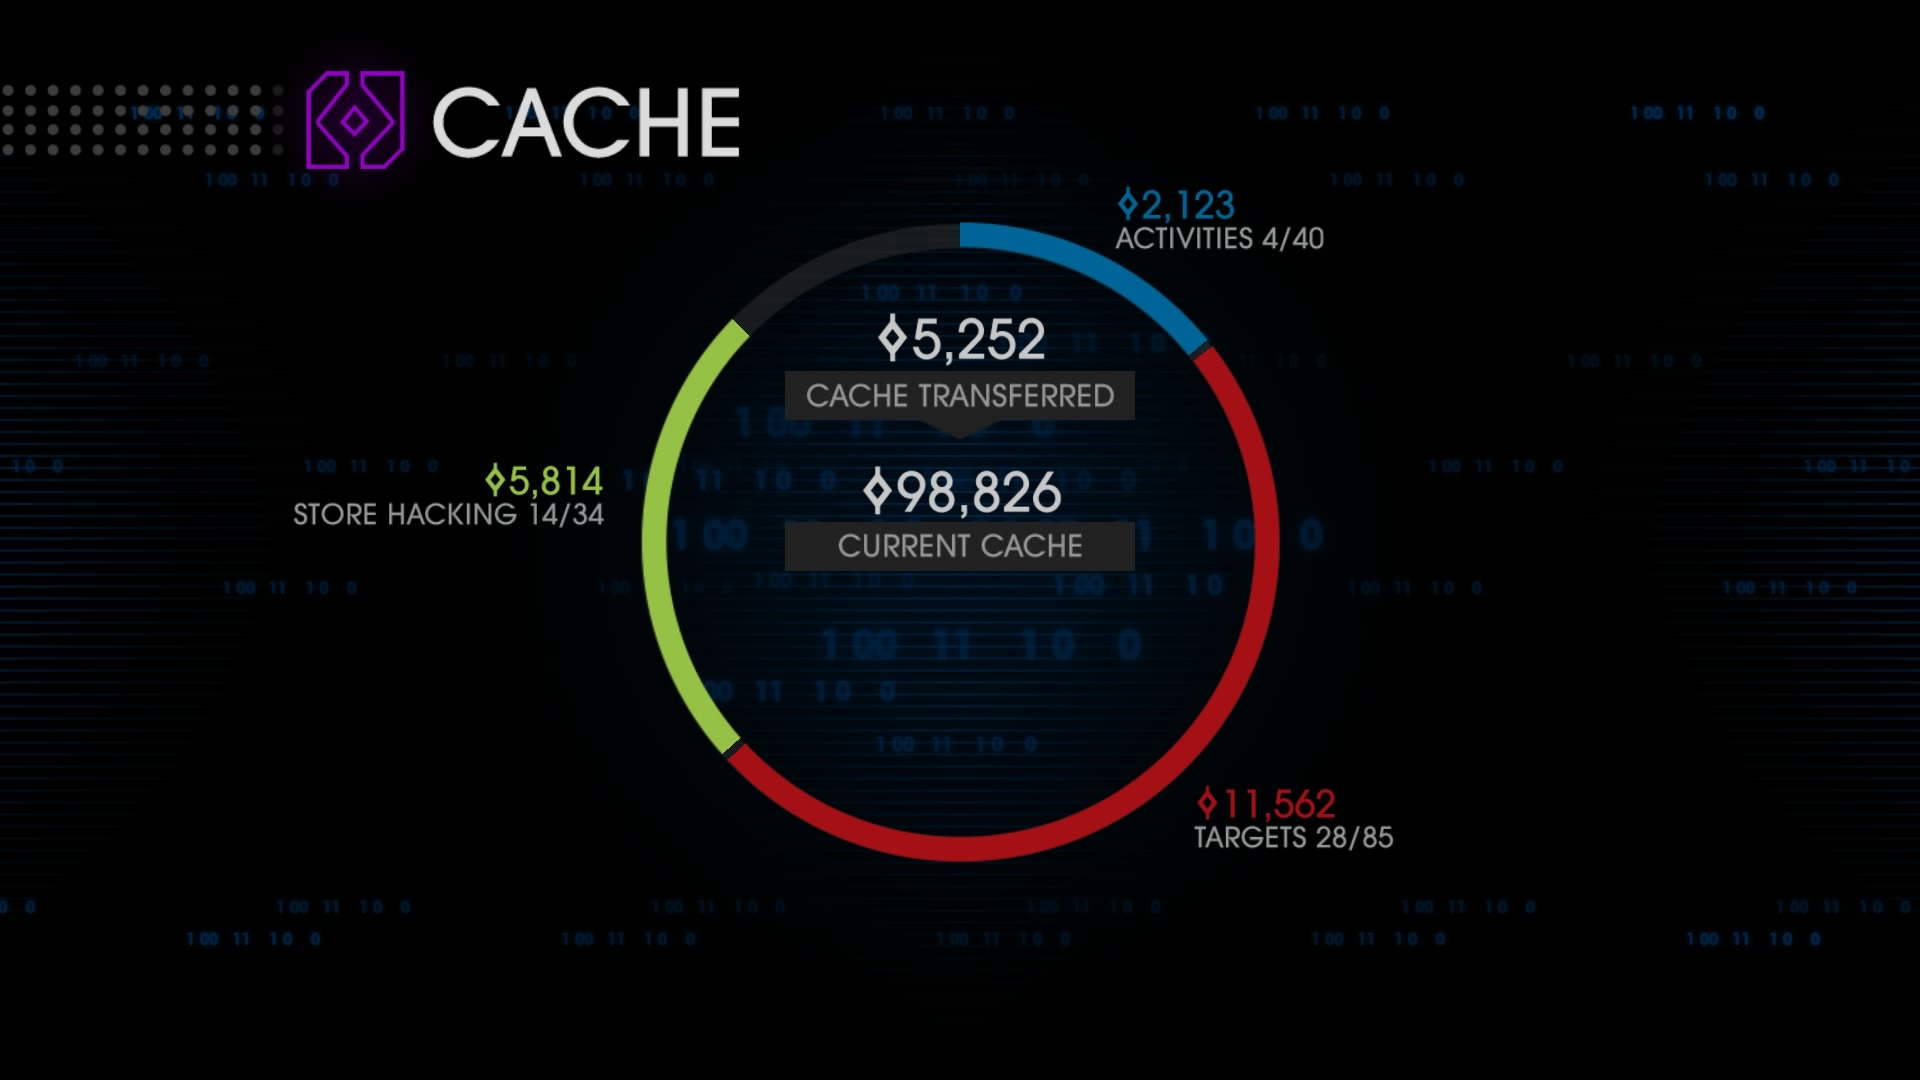 Remember your cache!